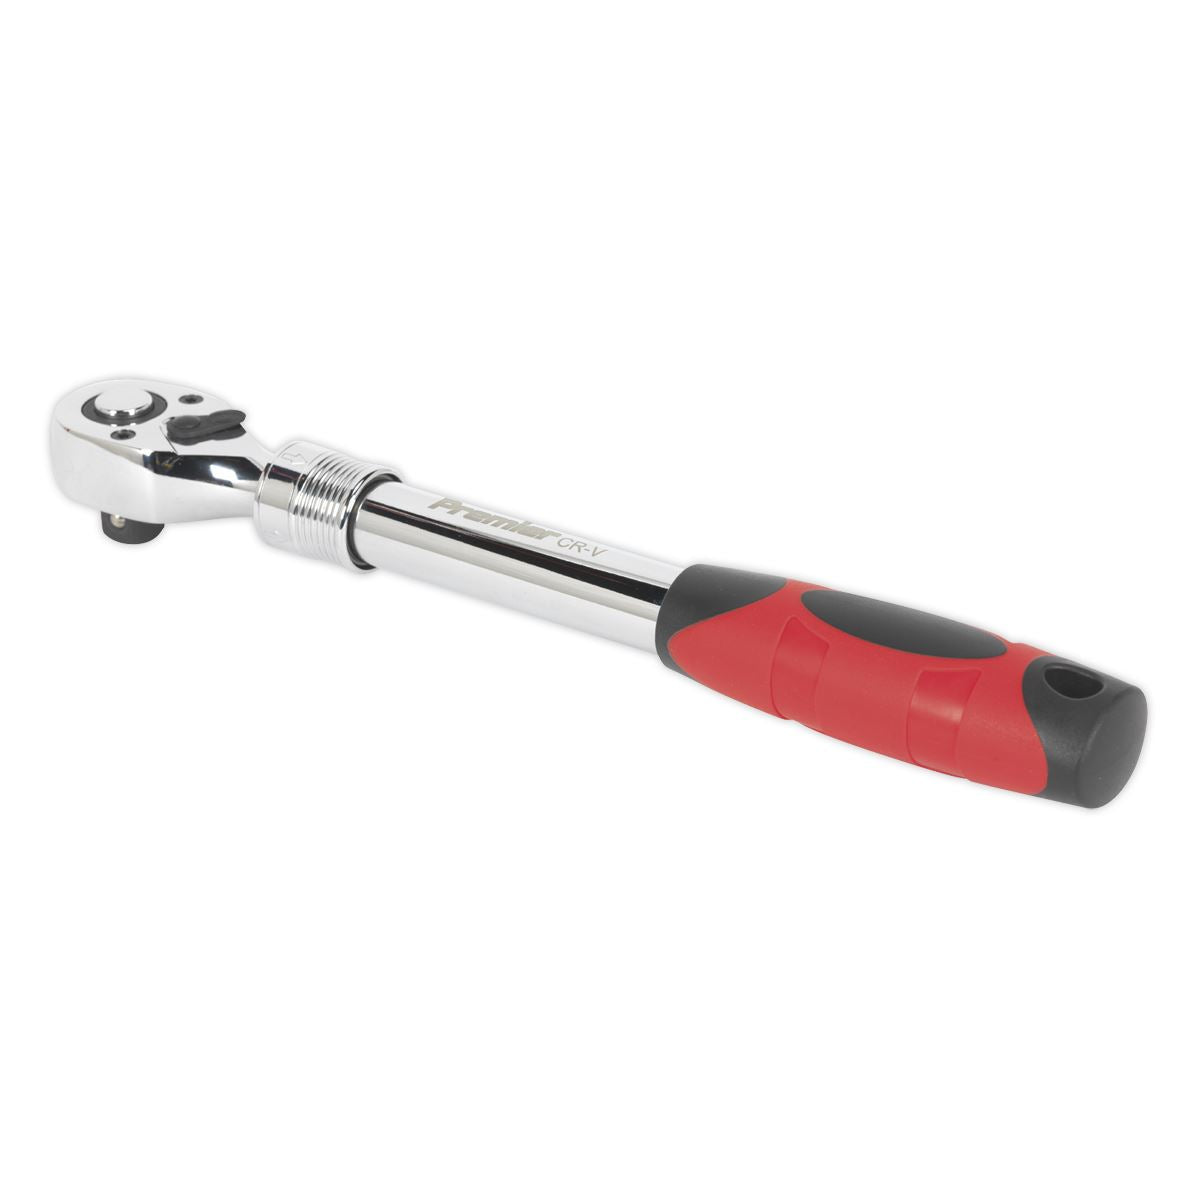 Sealey Premier Ratchet Wrench 1/2"Sq Drive Extendable